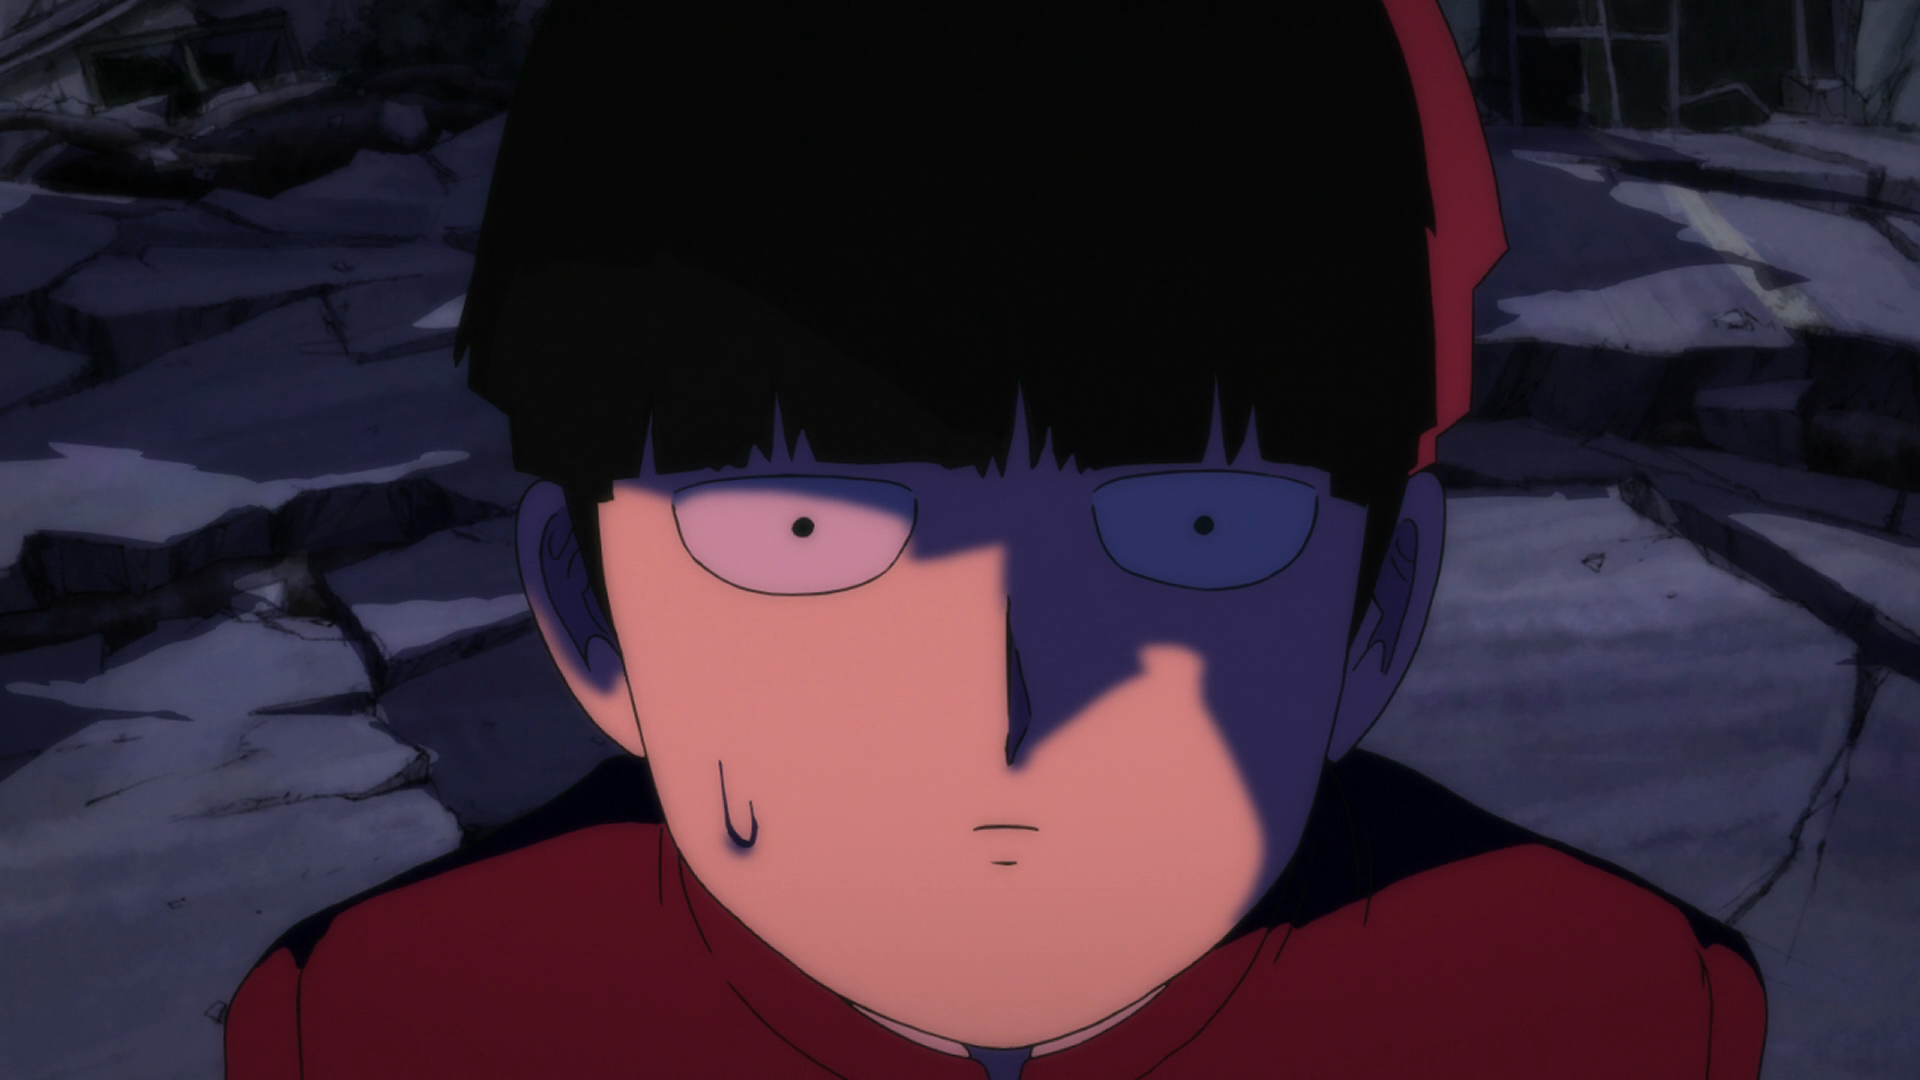 QUIZ: How Would You Make Mob from Mob Psycho 100 Go 100 Percent?